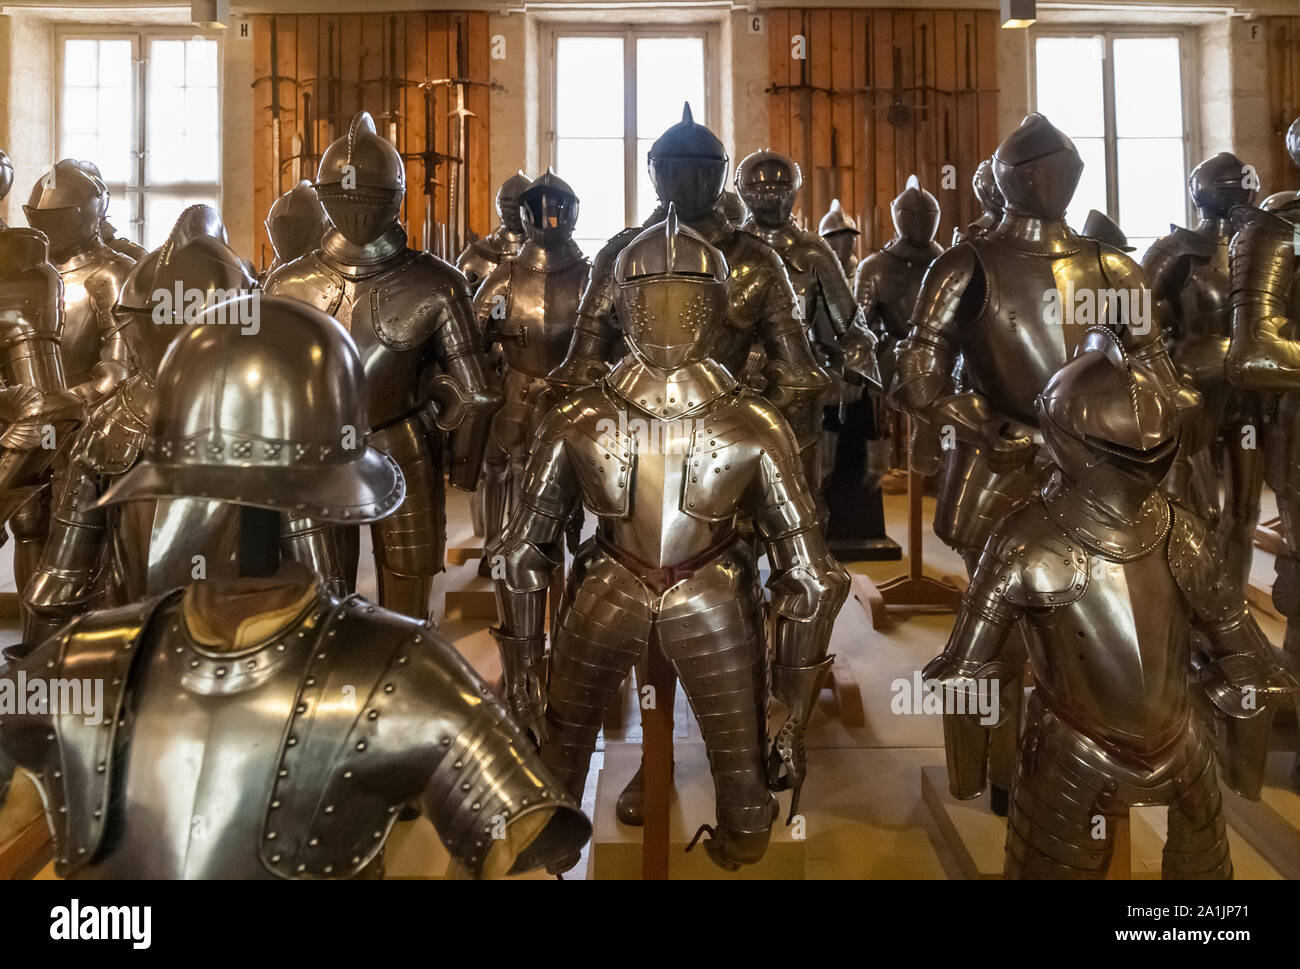 A room full of knight's armors with helmets displayed in the Département Ancien of the Musée de l’Armée which is in the famous Hôtel des Invalides... Stock Photo